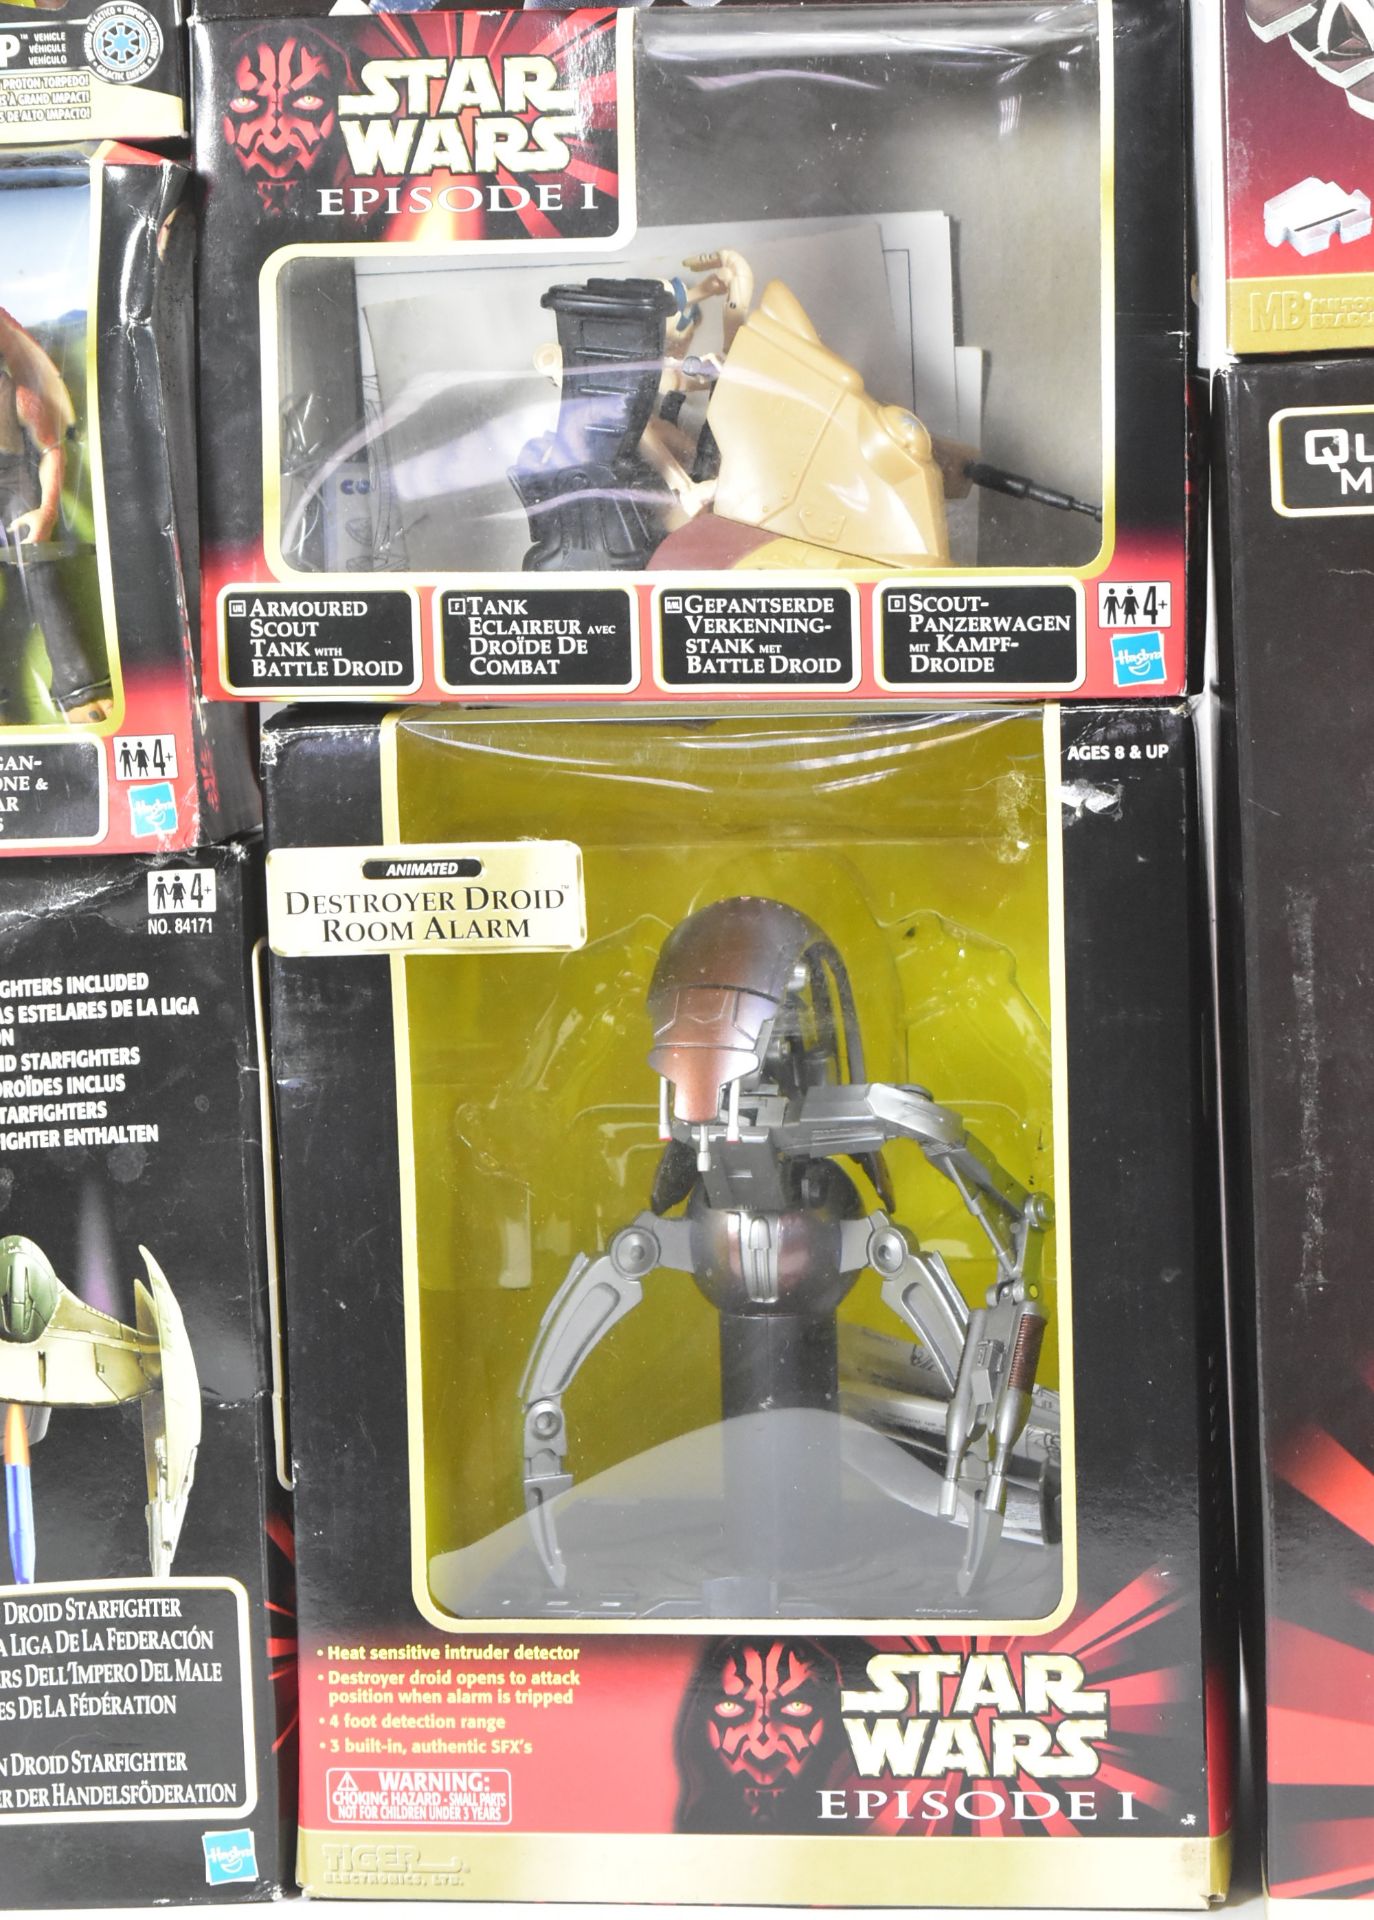 STAR WARS - EPISODE I - HASBRO BOXED ACTION FIGURE PLAYSETS - Image 3 of 6